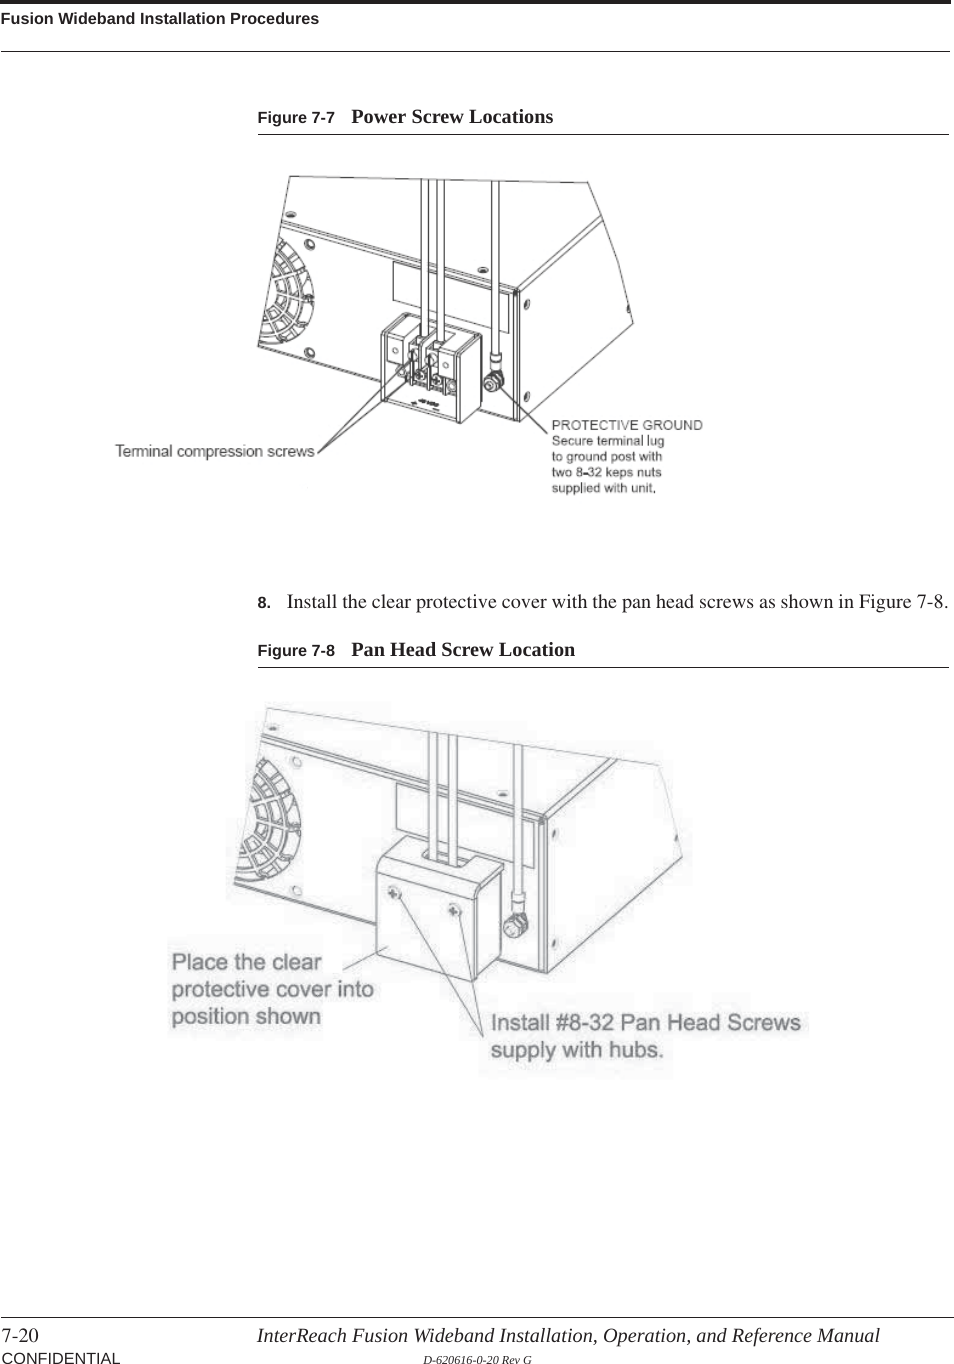 Fusion Wideband Installation Procedures7-20 InterReach Fusion Wideband Installation, Operation, and Reference Manual CONFIDENTIAL D-620616-0-20 Rev GFigure 7-7 Power Screw Locations8. Install the clear protective cover with the pan head screws as shown in Figure 7-8.Figure 7-8 Pan Head Screw Location